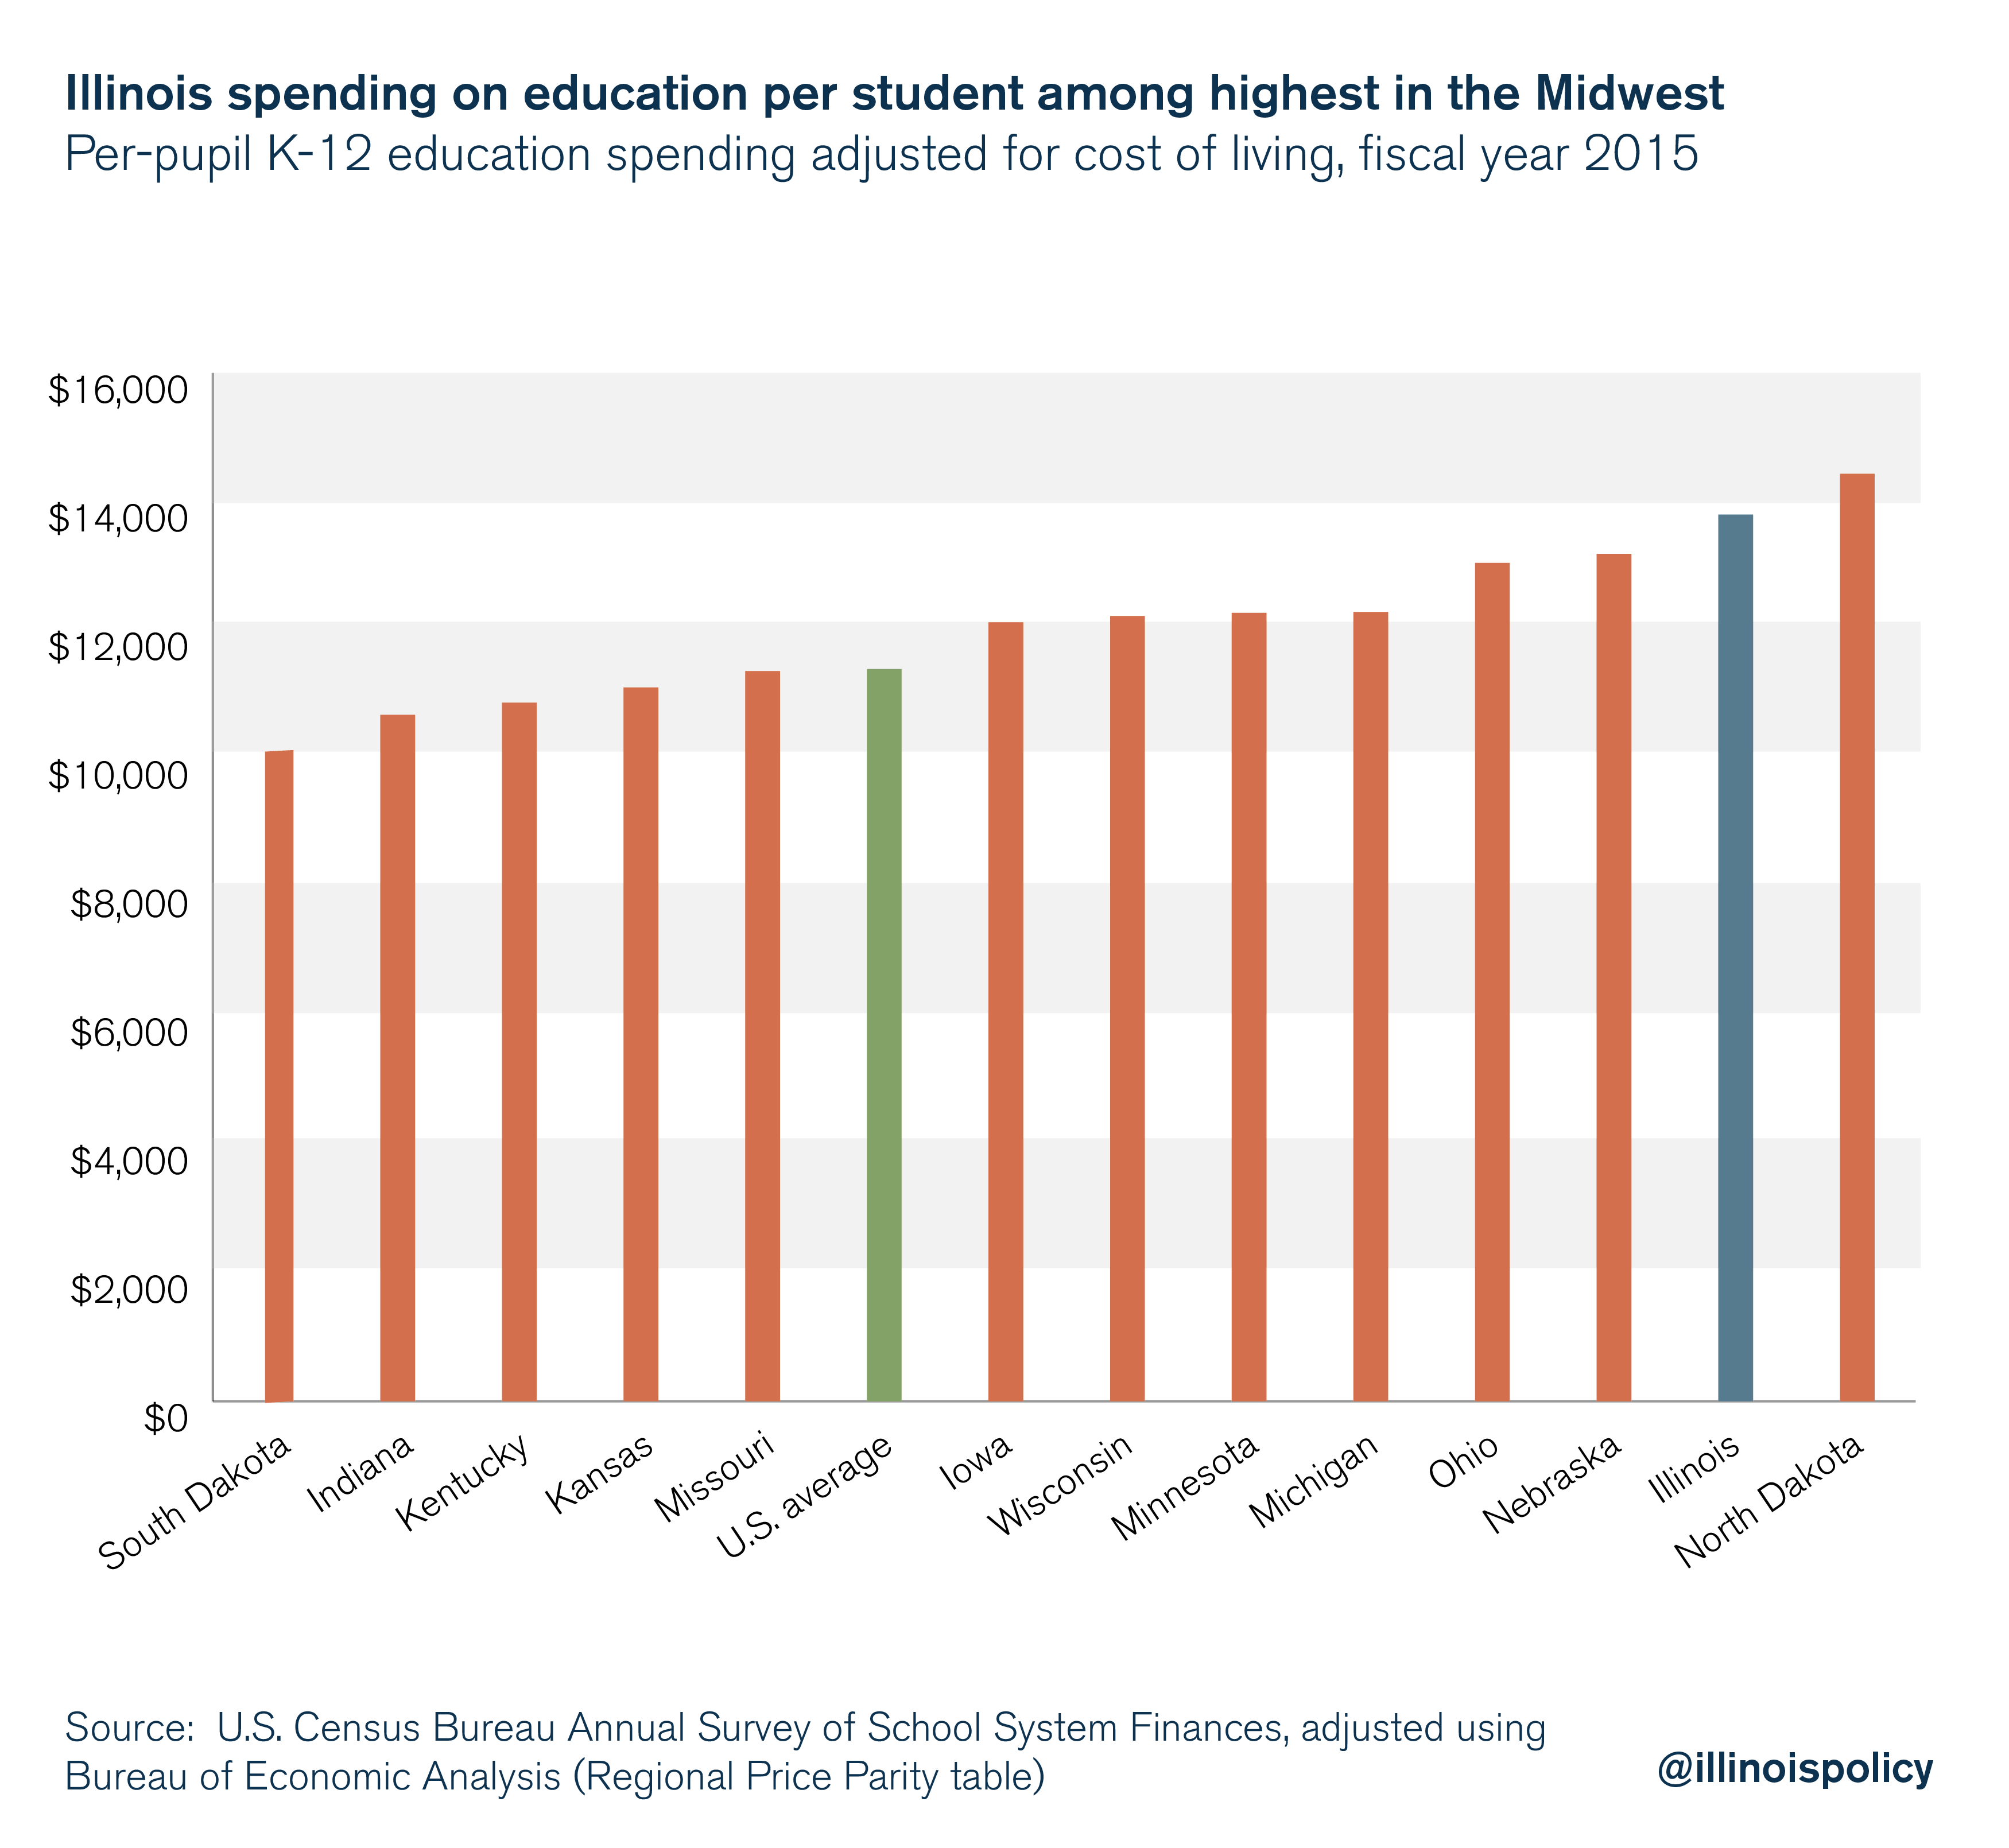 Illinois spending on education per student among highest in the Midwest